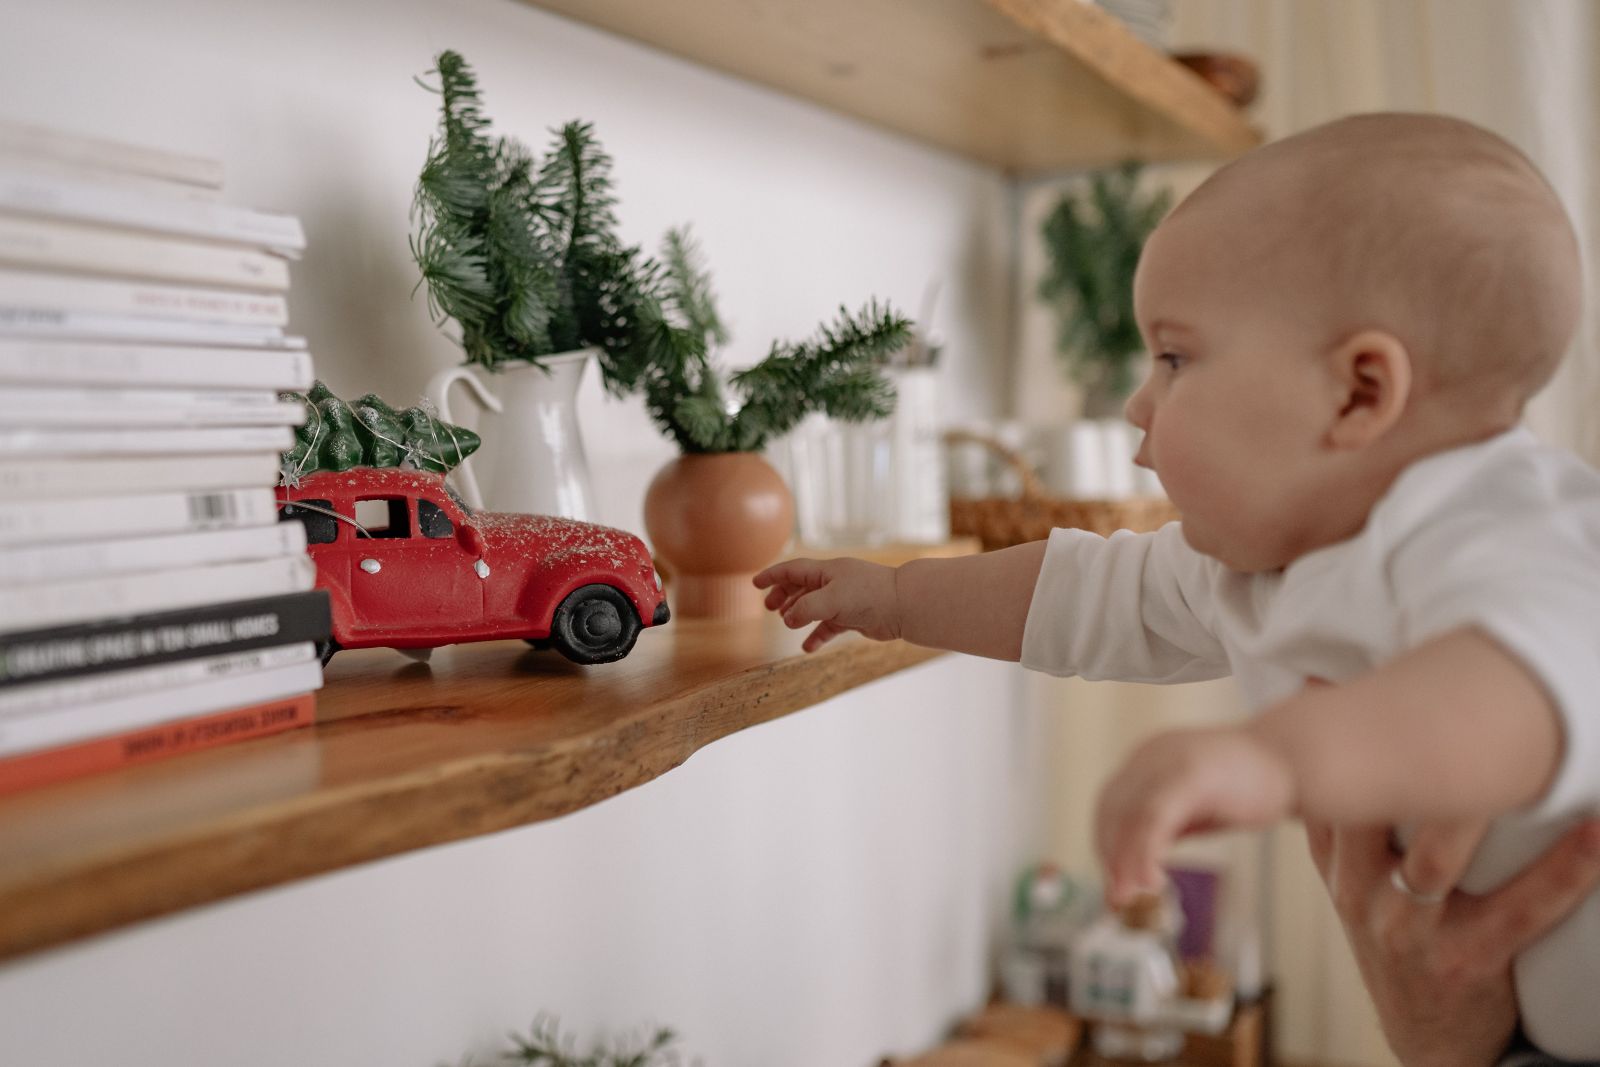 baby reaching for toy on shelf